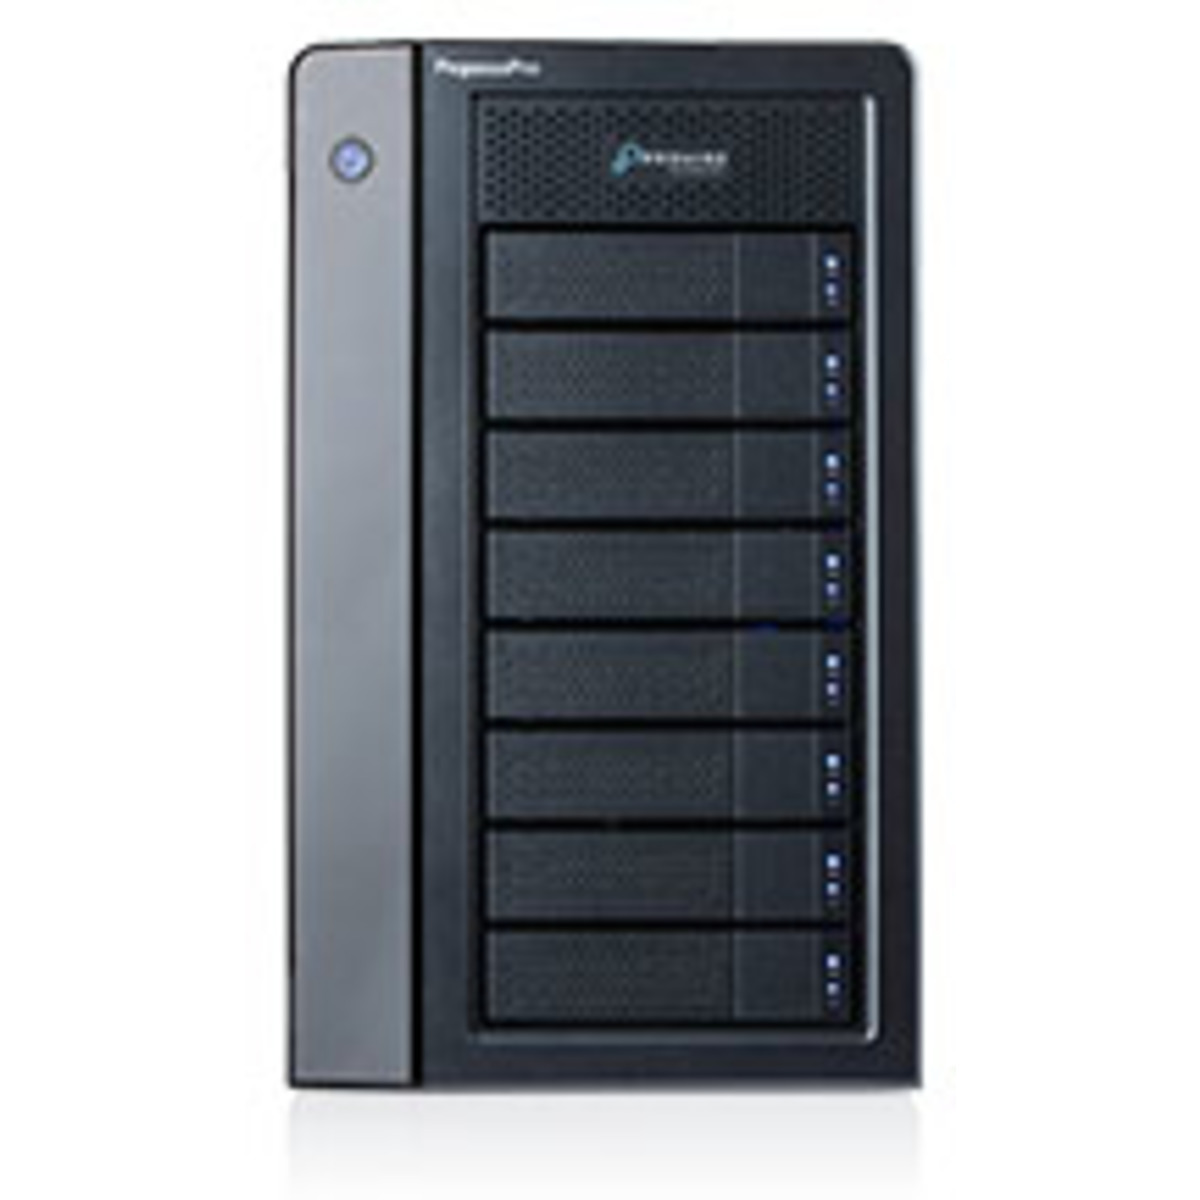 buy $6670 Promise Technology PegasusPro R8 16tb Desktop DAS-NAS - Combo Direct + Network Storage Device 8x2000gb Seagate BarraCuda ST2000DM008 3.5 7200rpm SATA 6Gb/s HDD CONSUMER Class Drives Installed - Burn-In Tested - ON SALE - nas headquarters buy network attached storage server device das new raid-5 free shipping usa christmas new year holiday sale PegasusPro R8